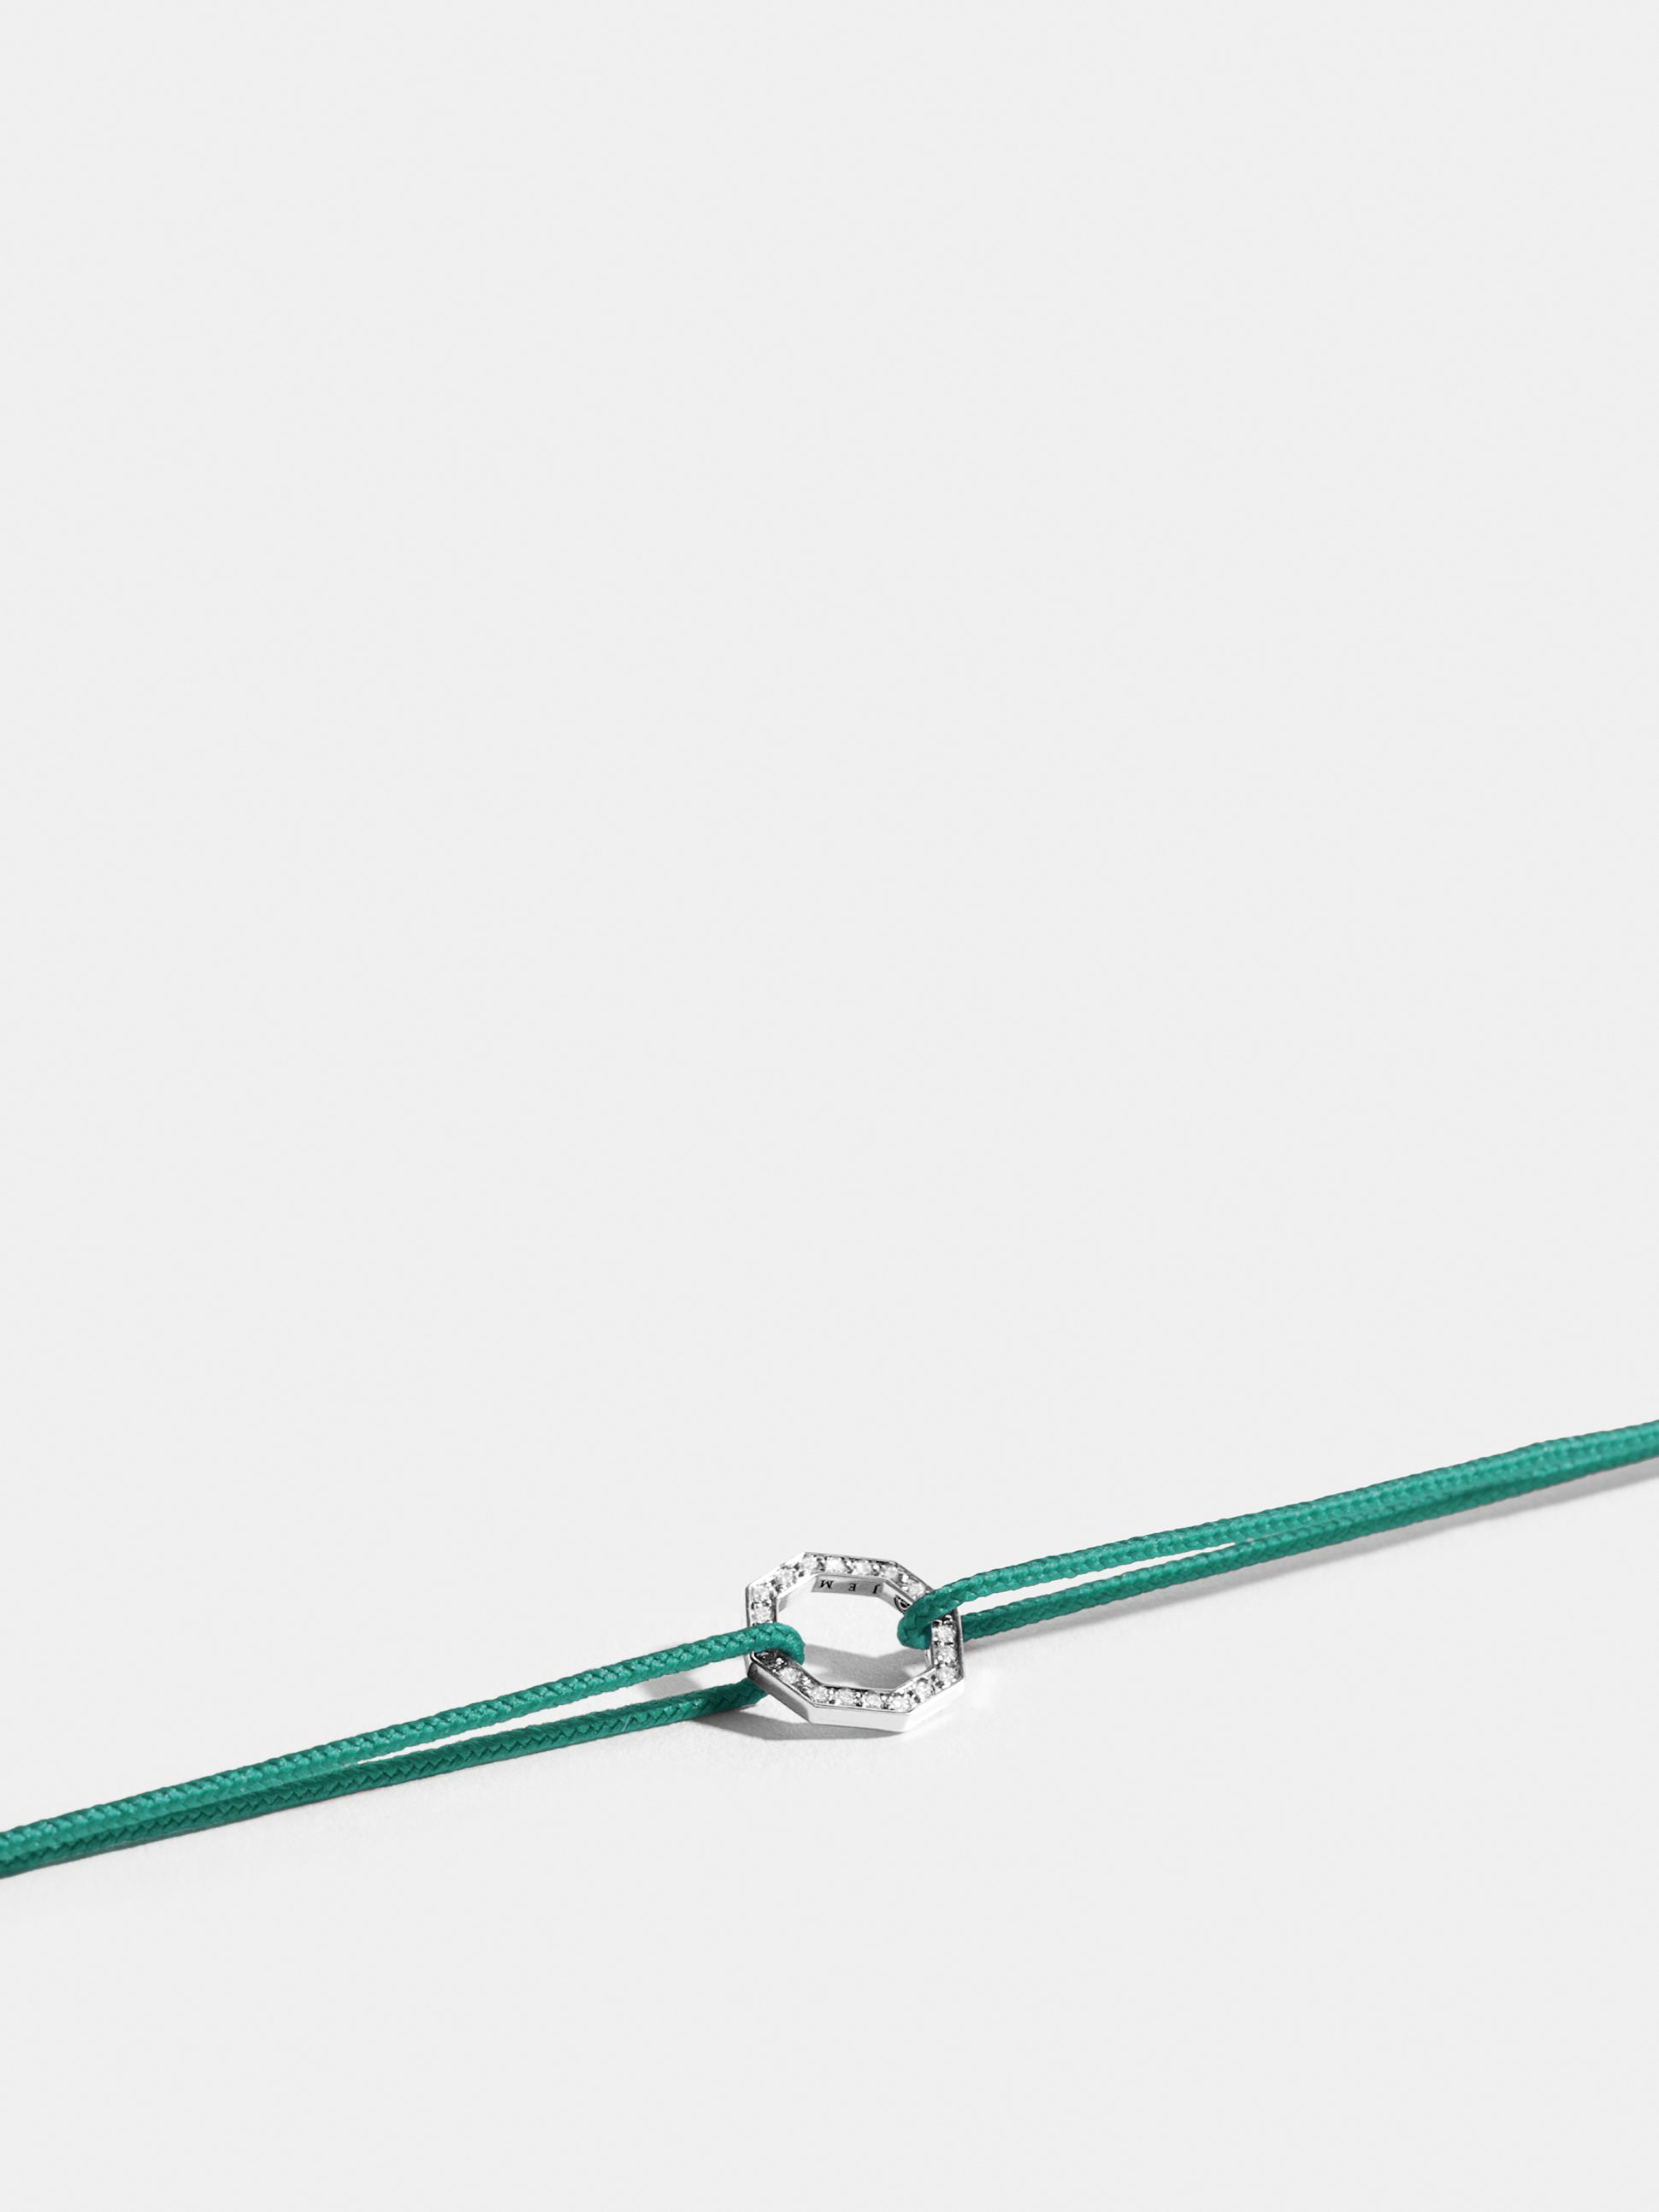 Octogone motif in 18k Fairmined ethical white gold, paved with lab-grown diamonds, on a turquoise blue cord.